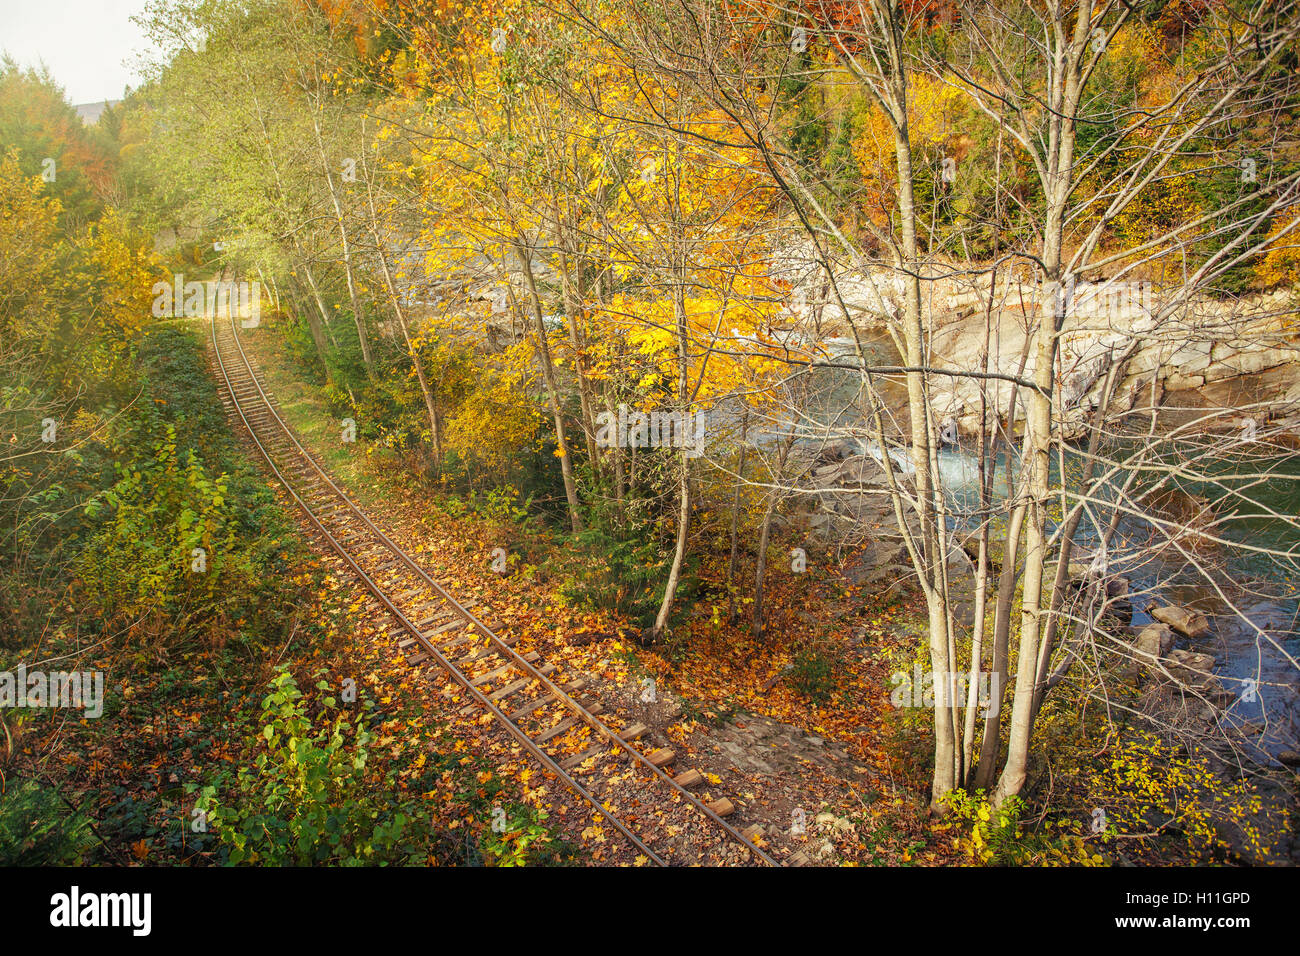 railway road in autumn forest Stock Photo